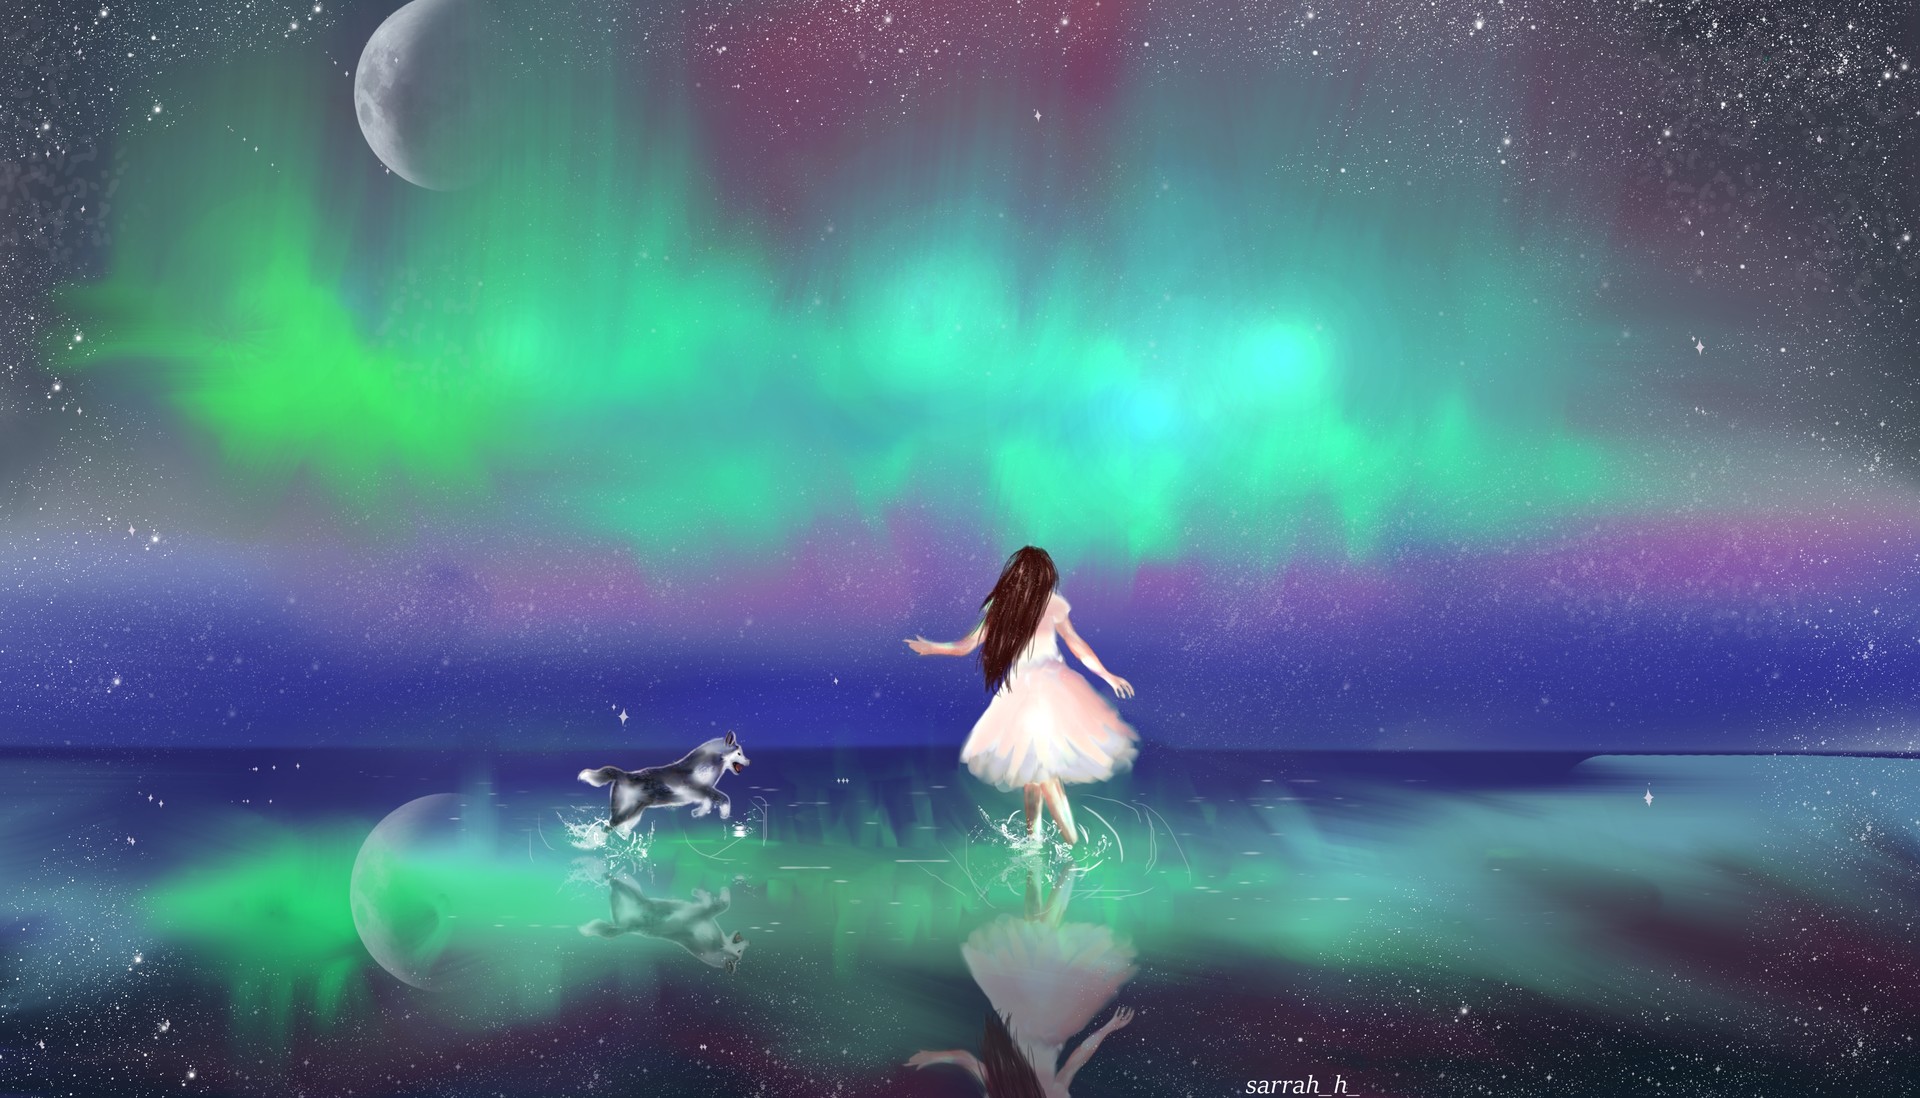 Drawphics by Sarah - I wanna touch the Northern lights 🎶 Song -Northern lights Young